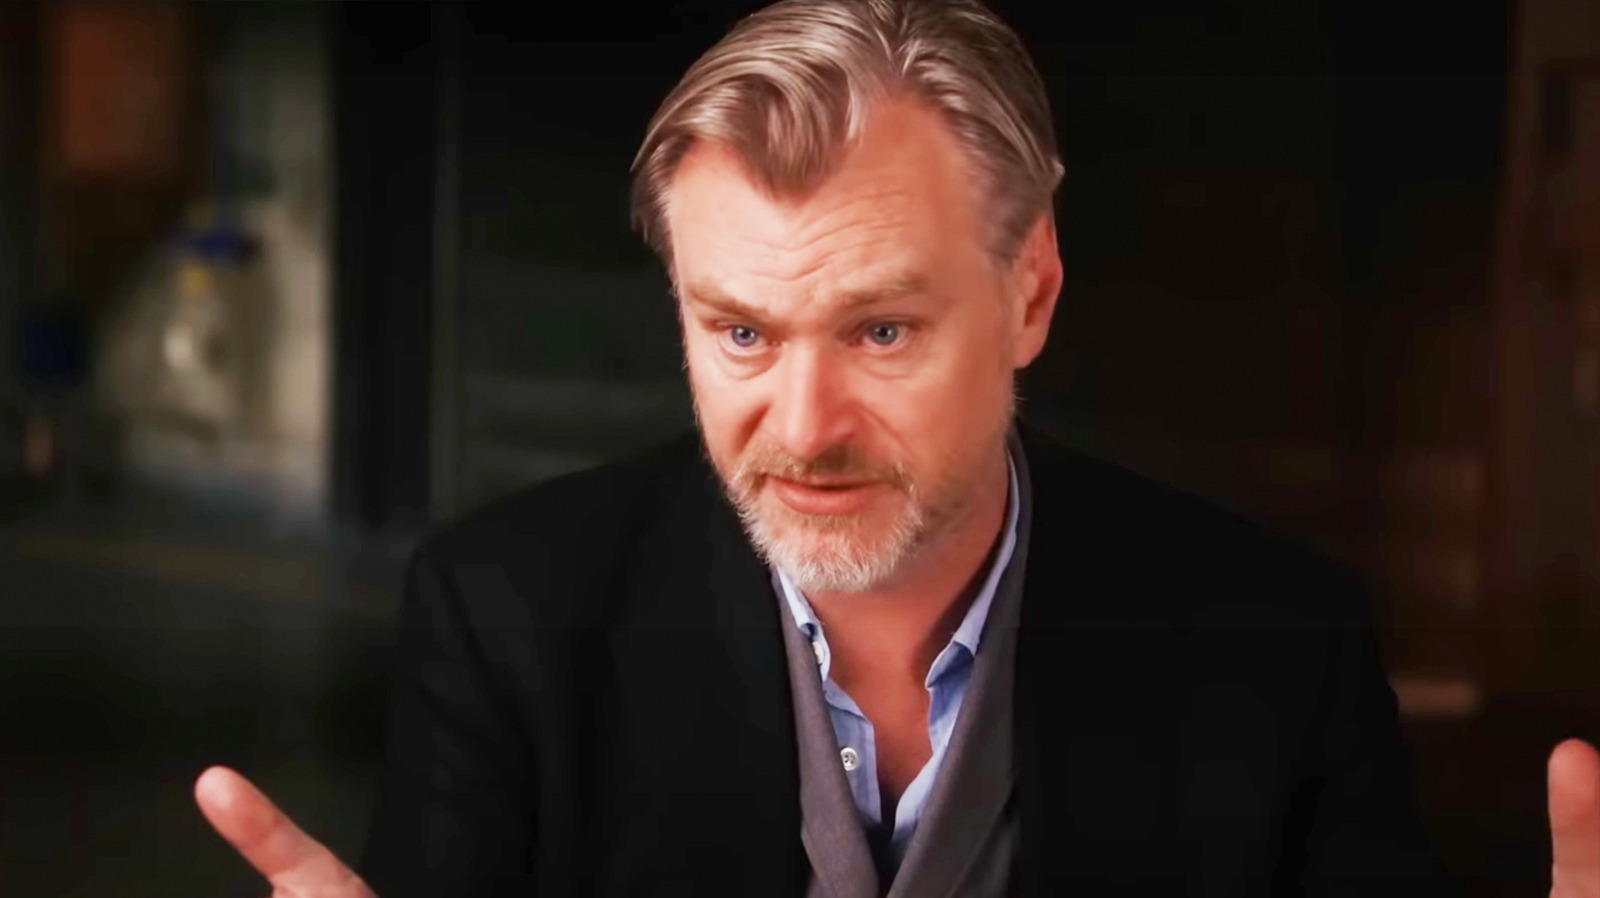 Christopher Nolan certainly looks set to direct a Bond movie